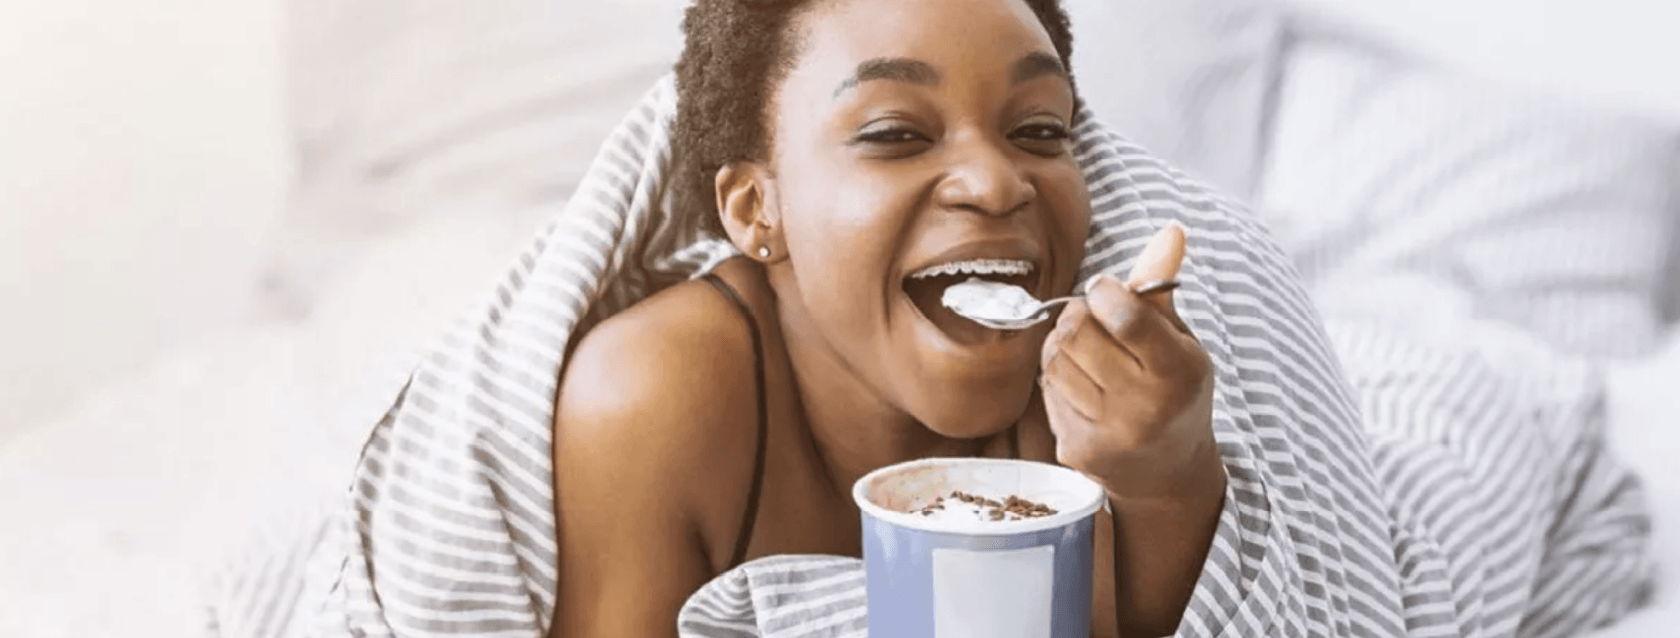 Foods With Braces Header - Teen Eating Ice Cream In Bed